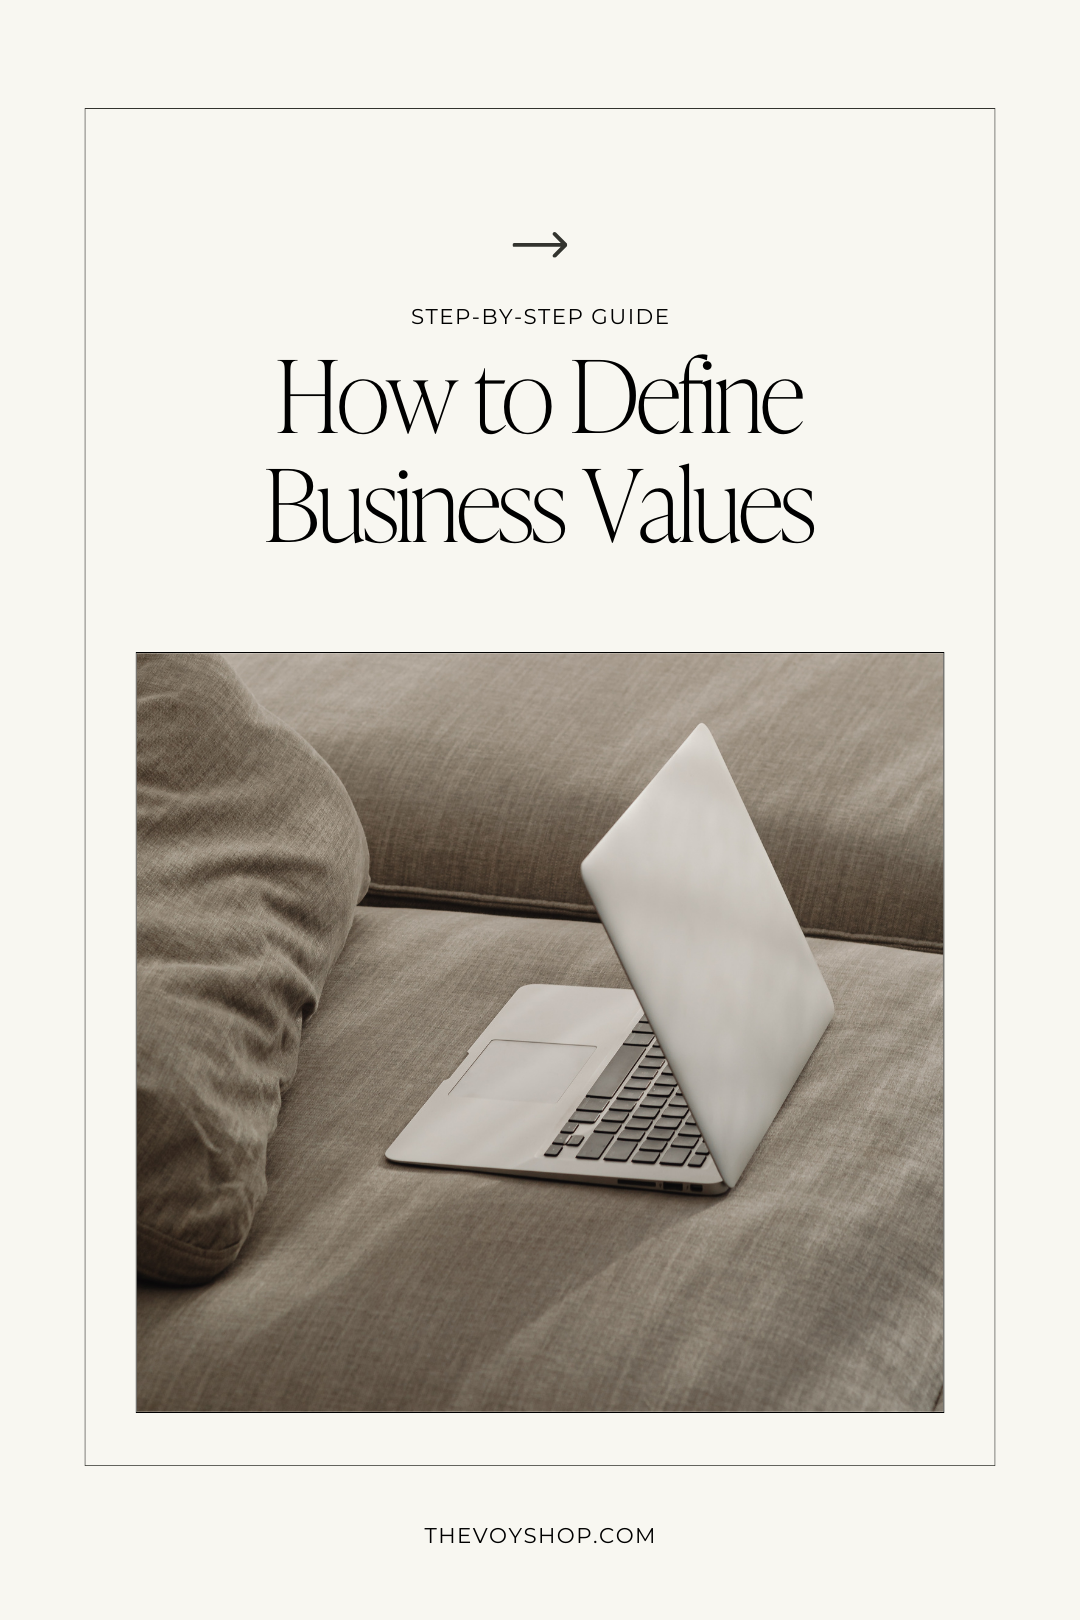 Step-by-Step Guide How to Define Business Values